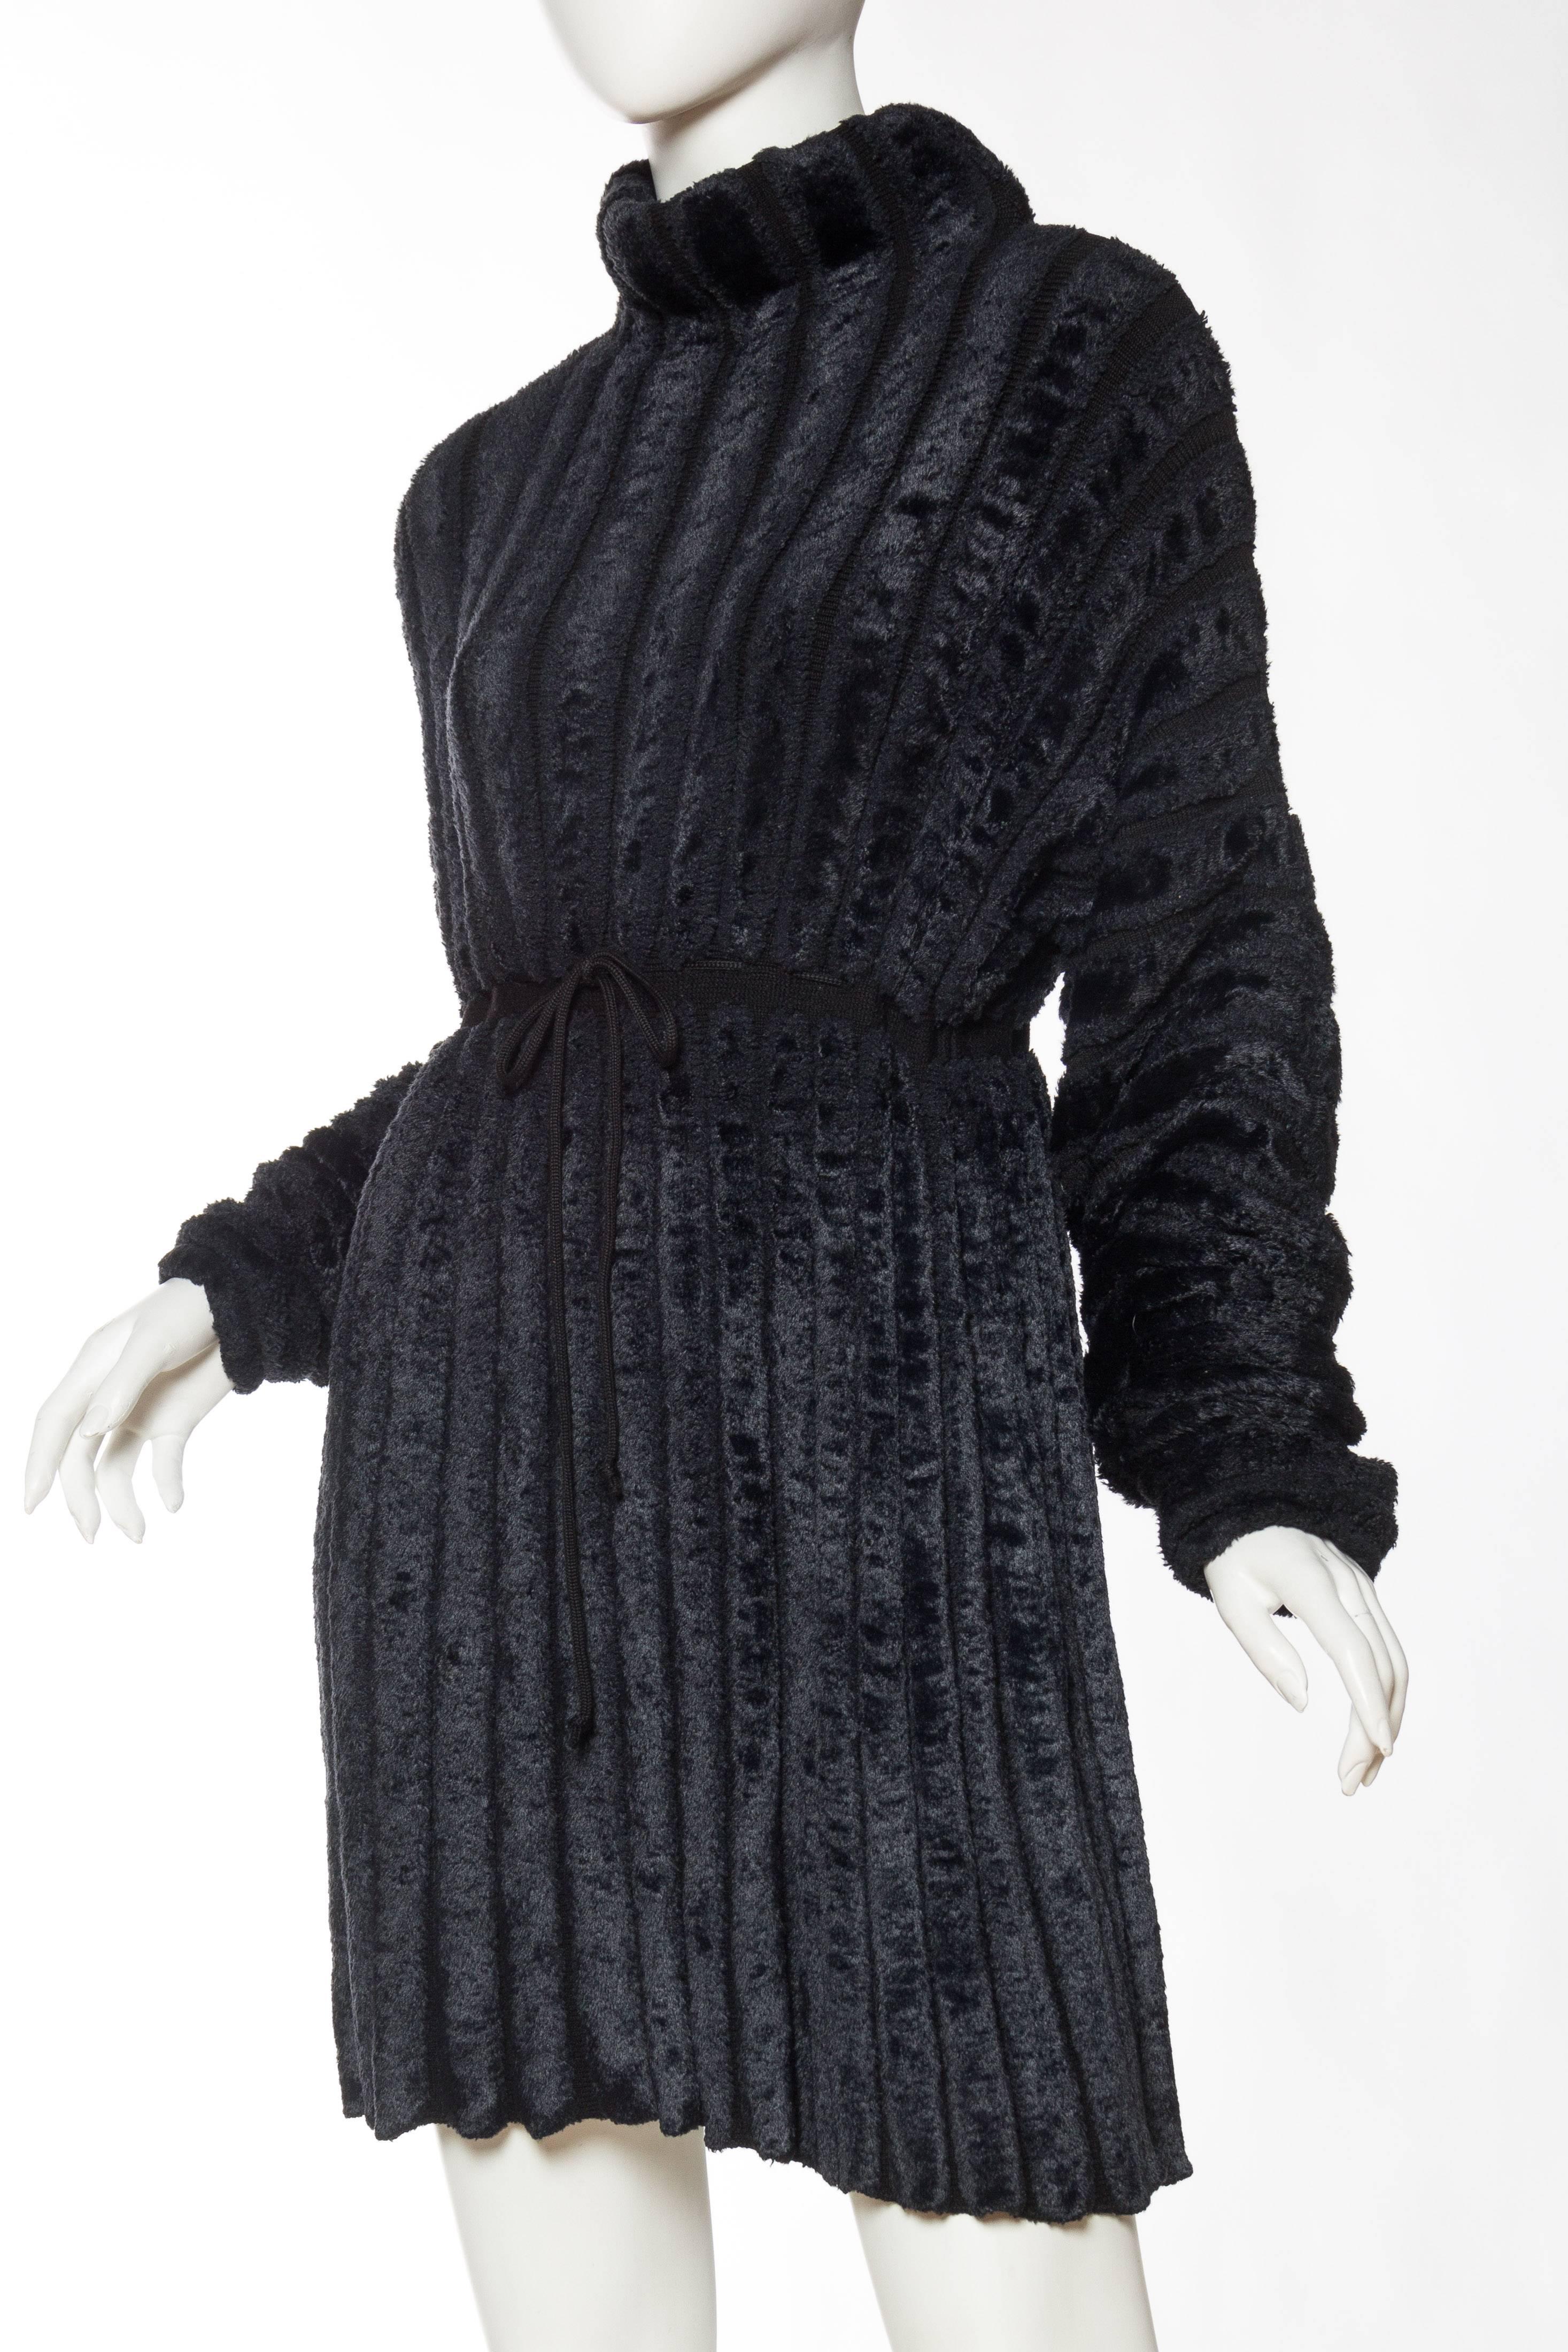 Alaia Iconic Oversized Chenille Dress, Fall 1988 Collection 1